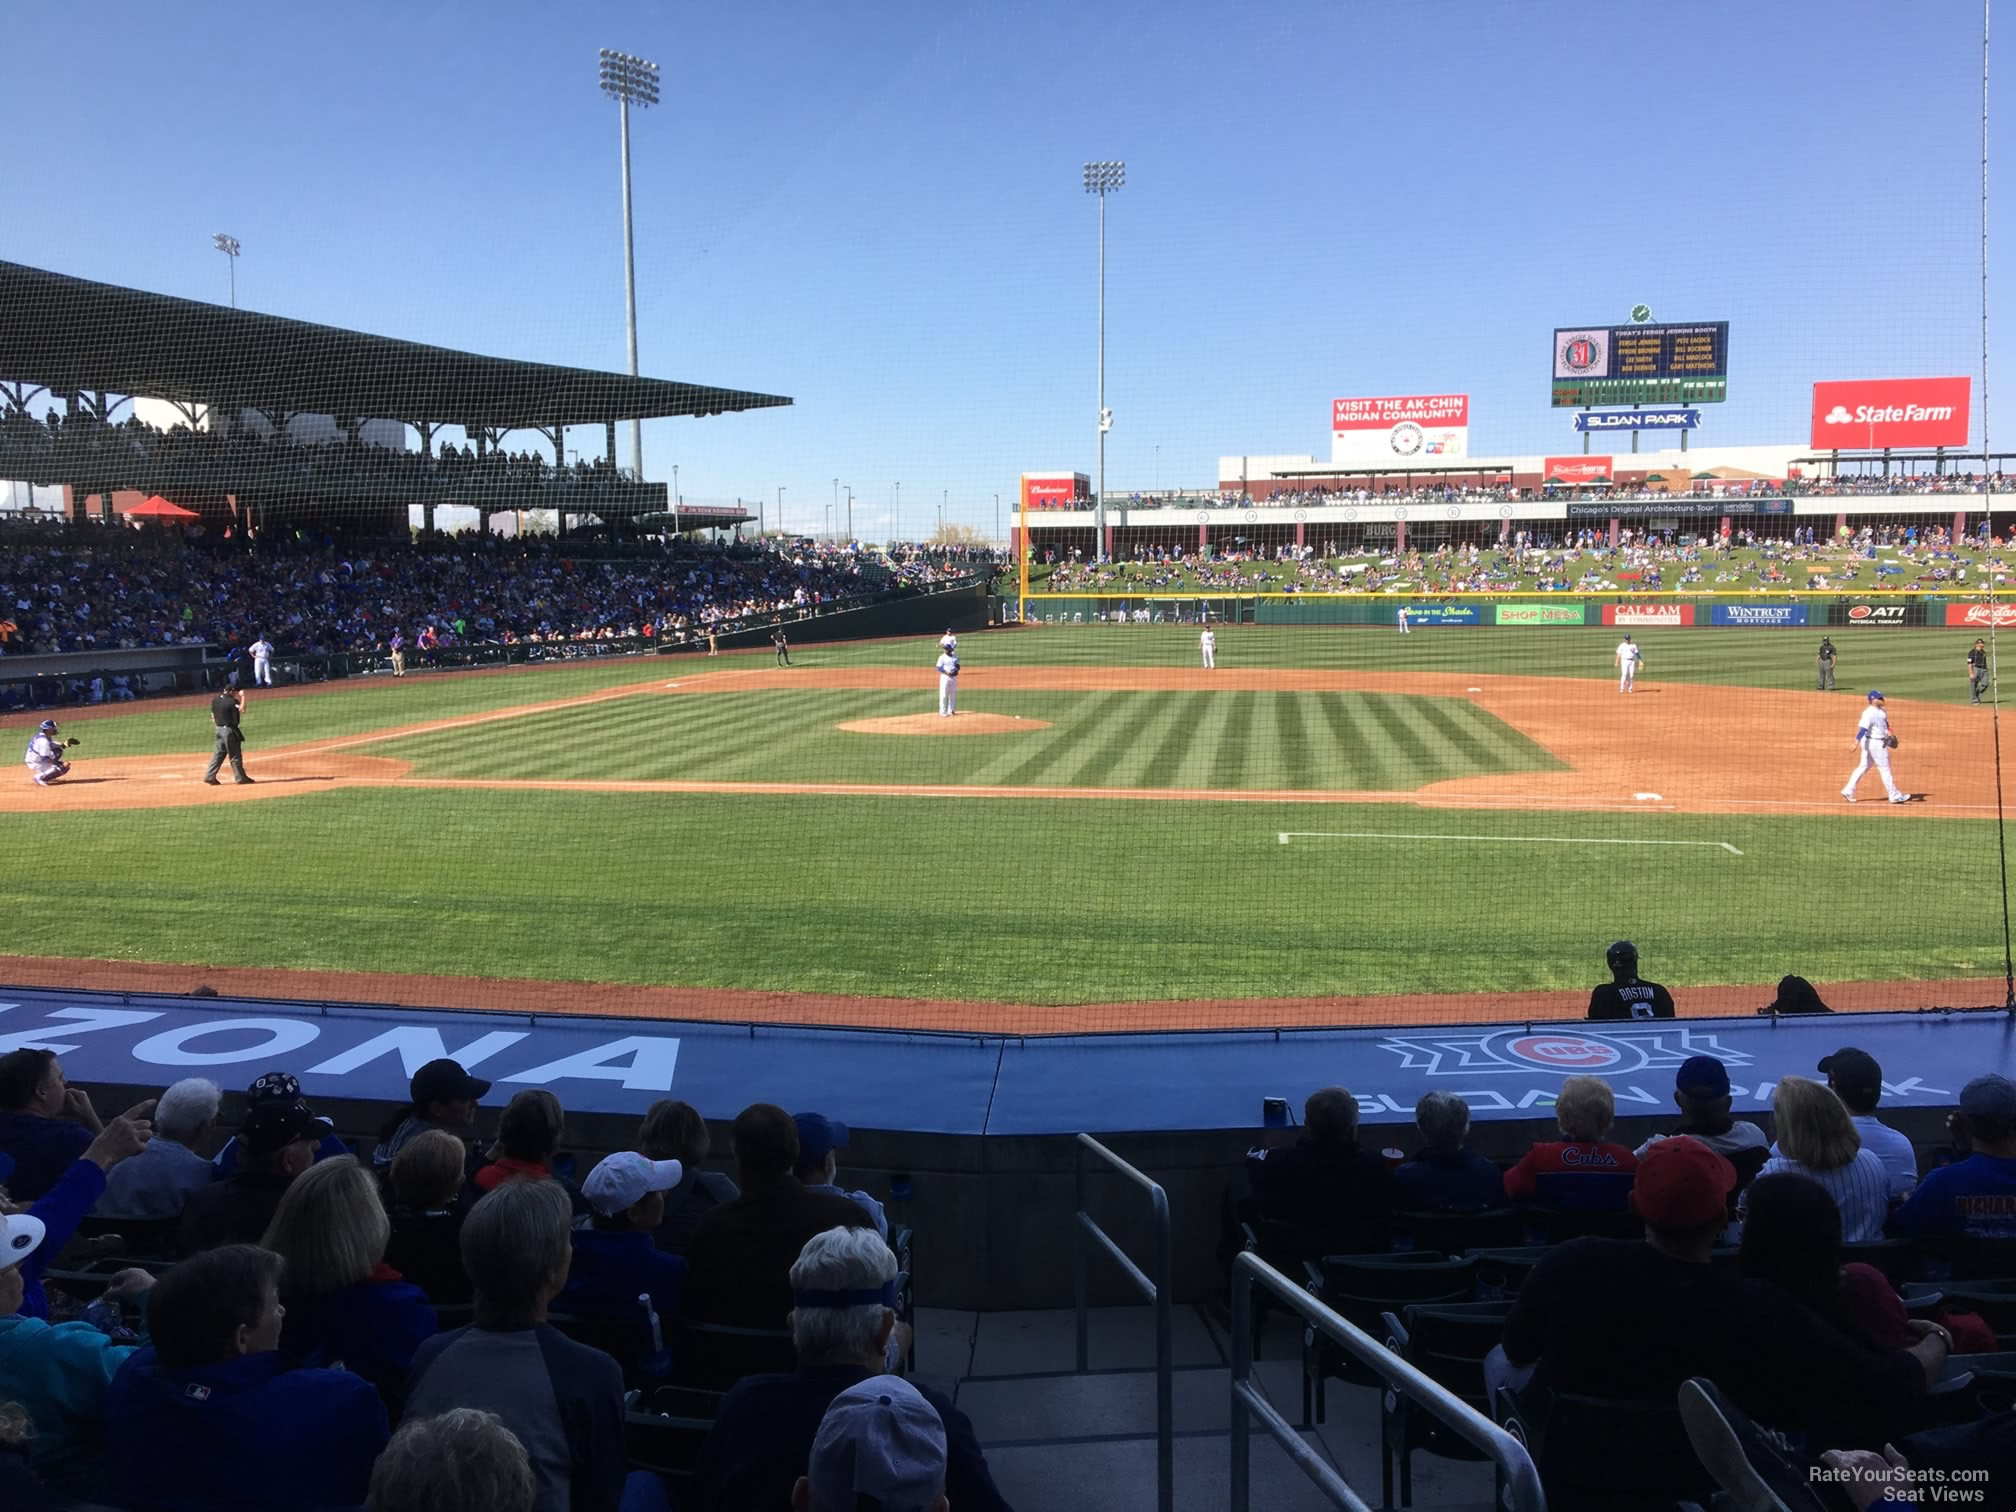 section 115, row 12 seat view  - sloan park